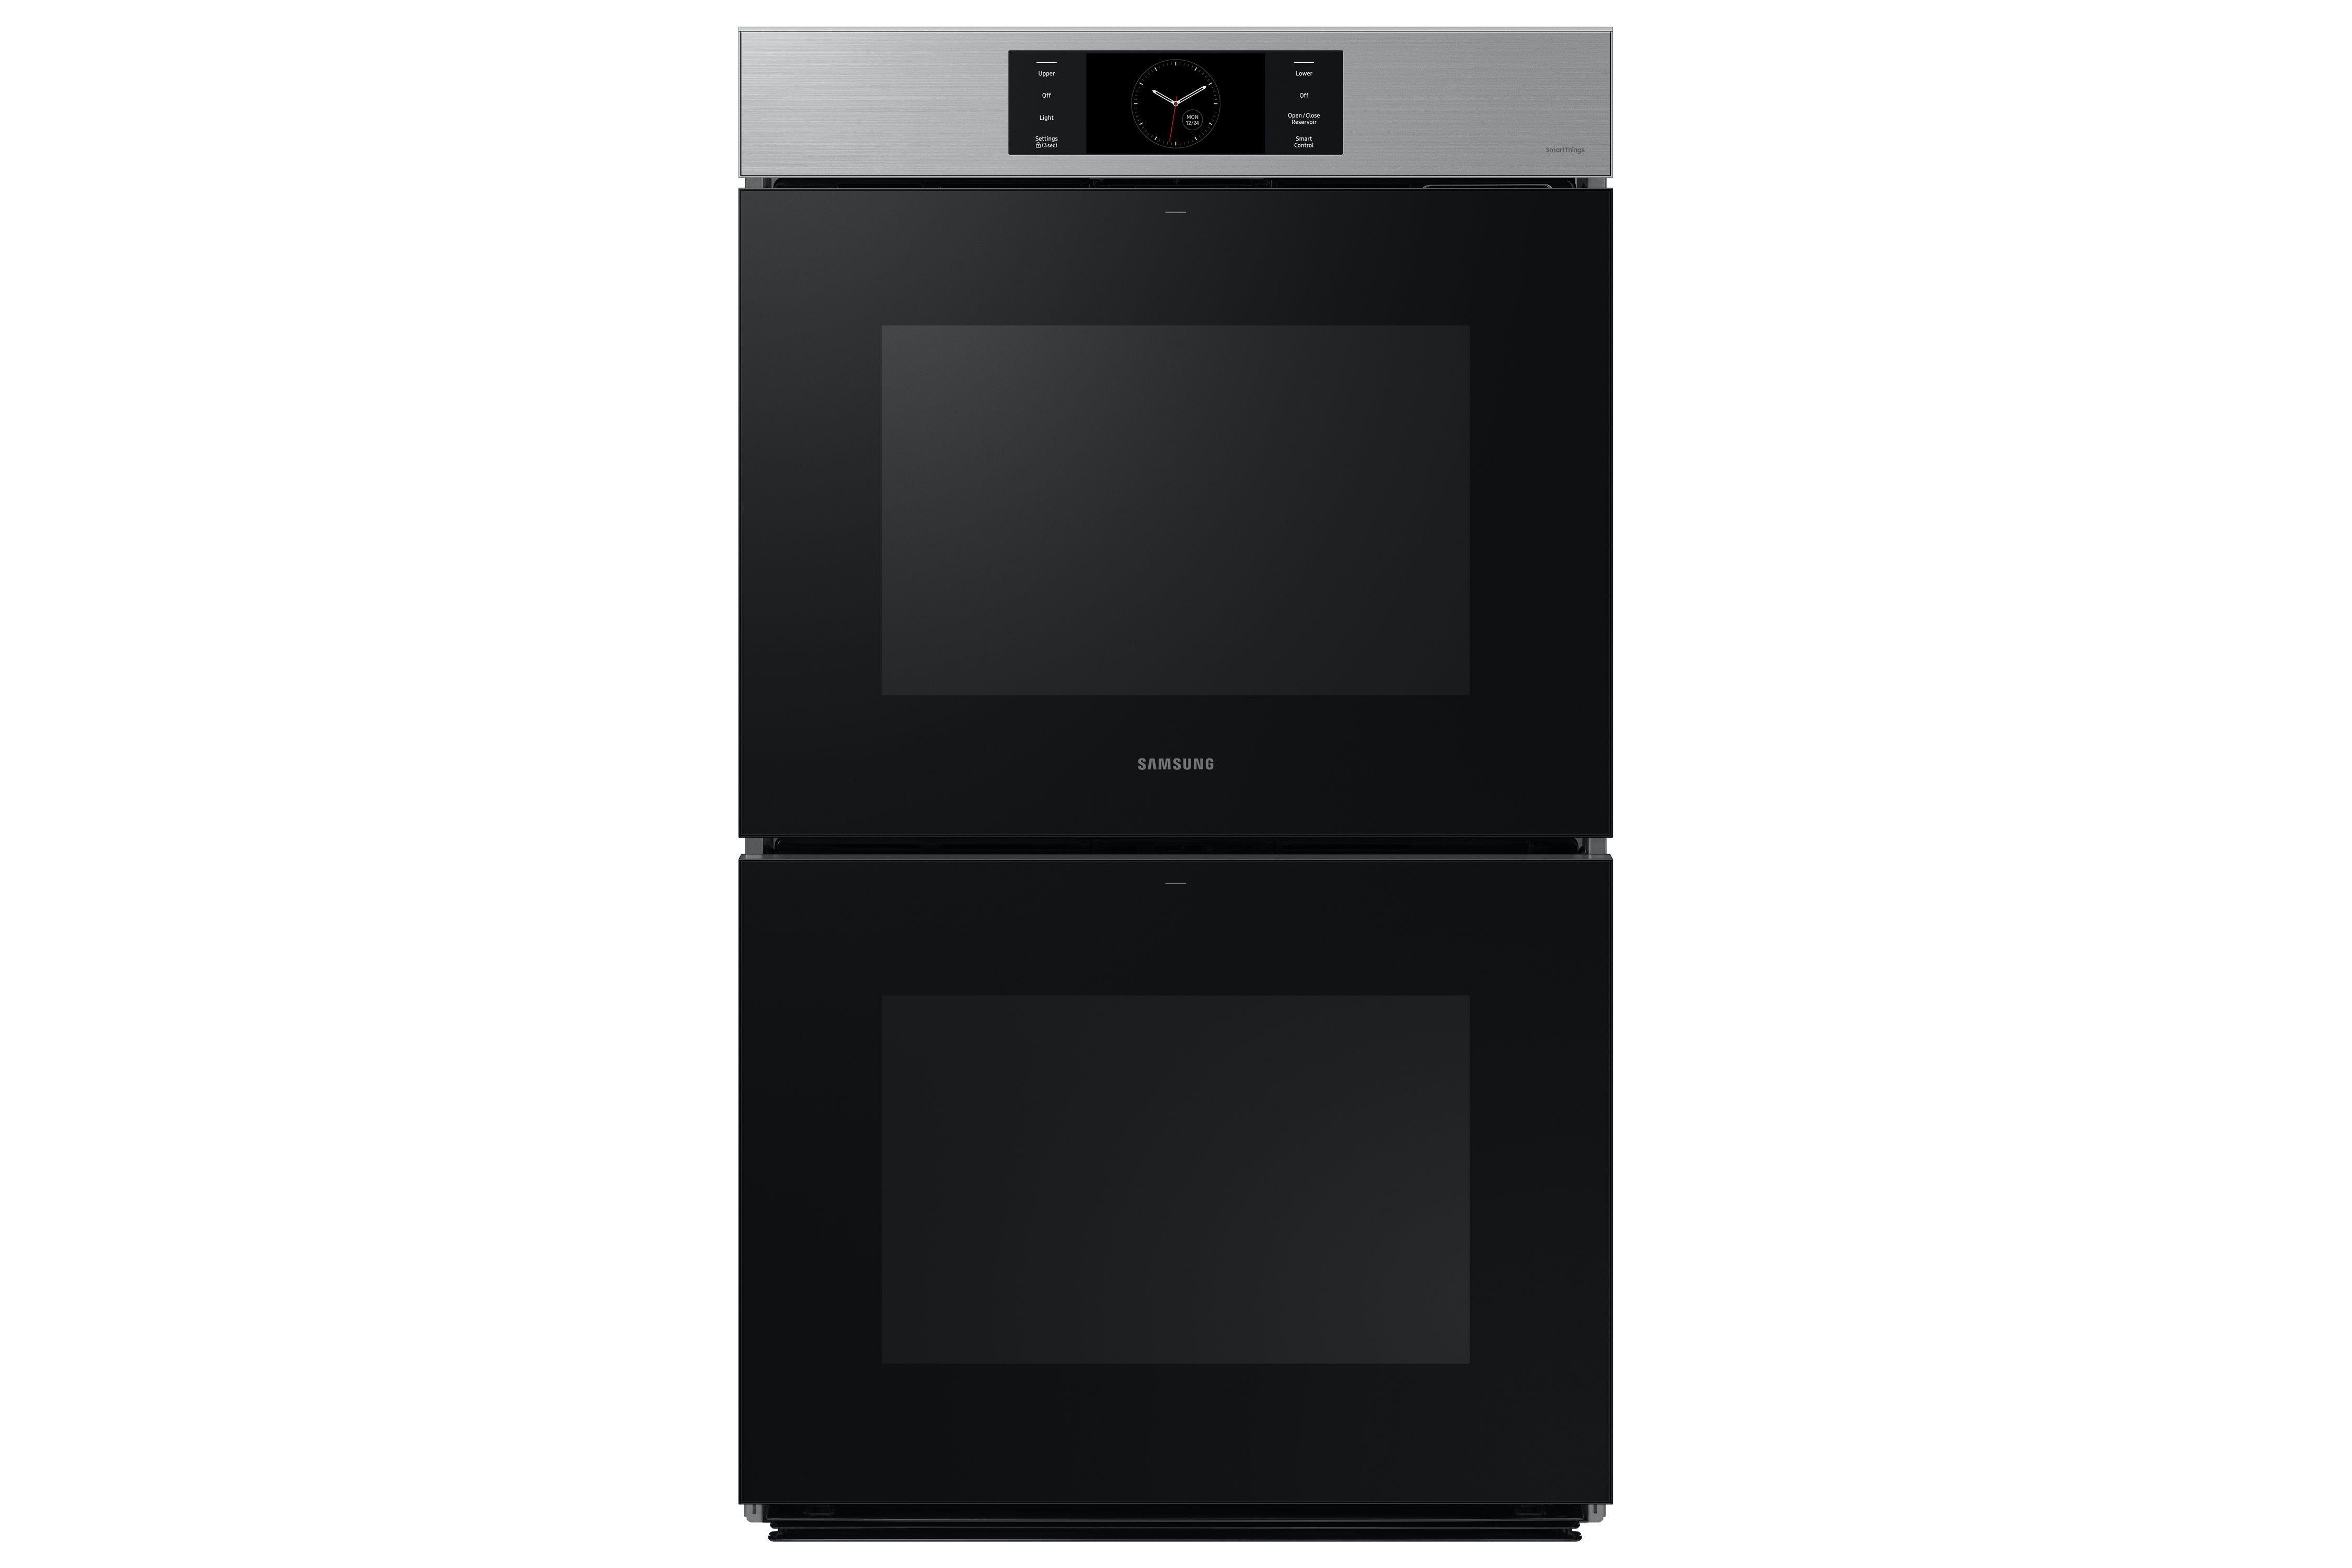 Samsung - 5.1 cu. ft Double Wall Oven in Stainless - NV51CG700DSRAA